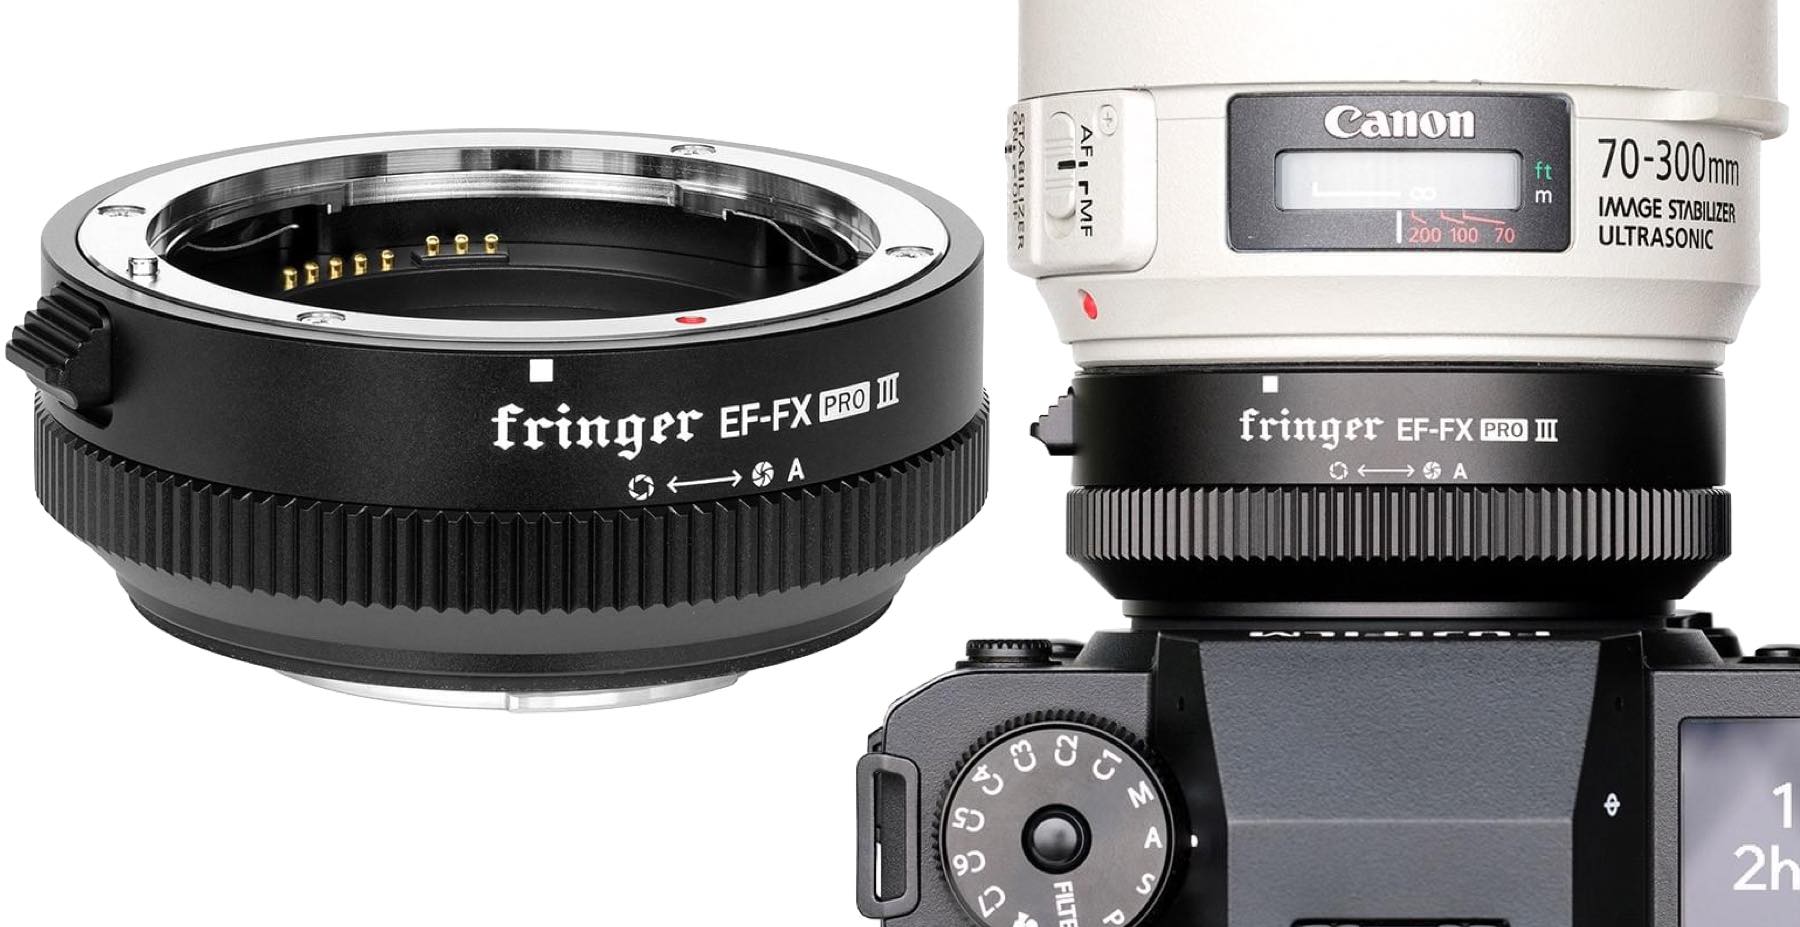 Fringer EF-FX Pro III Released with Weather Sealing - Fuji Rumors